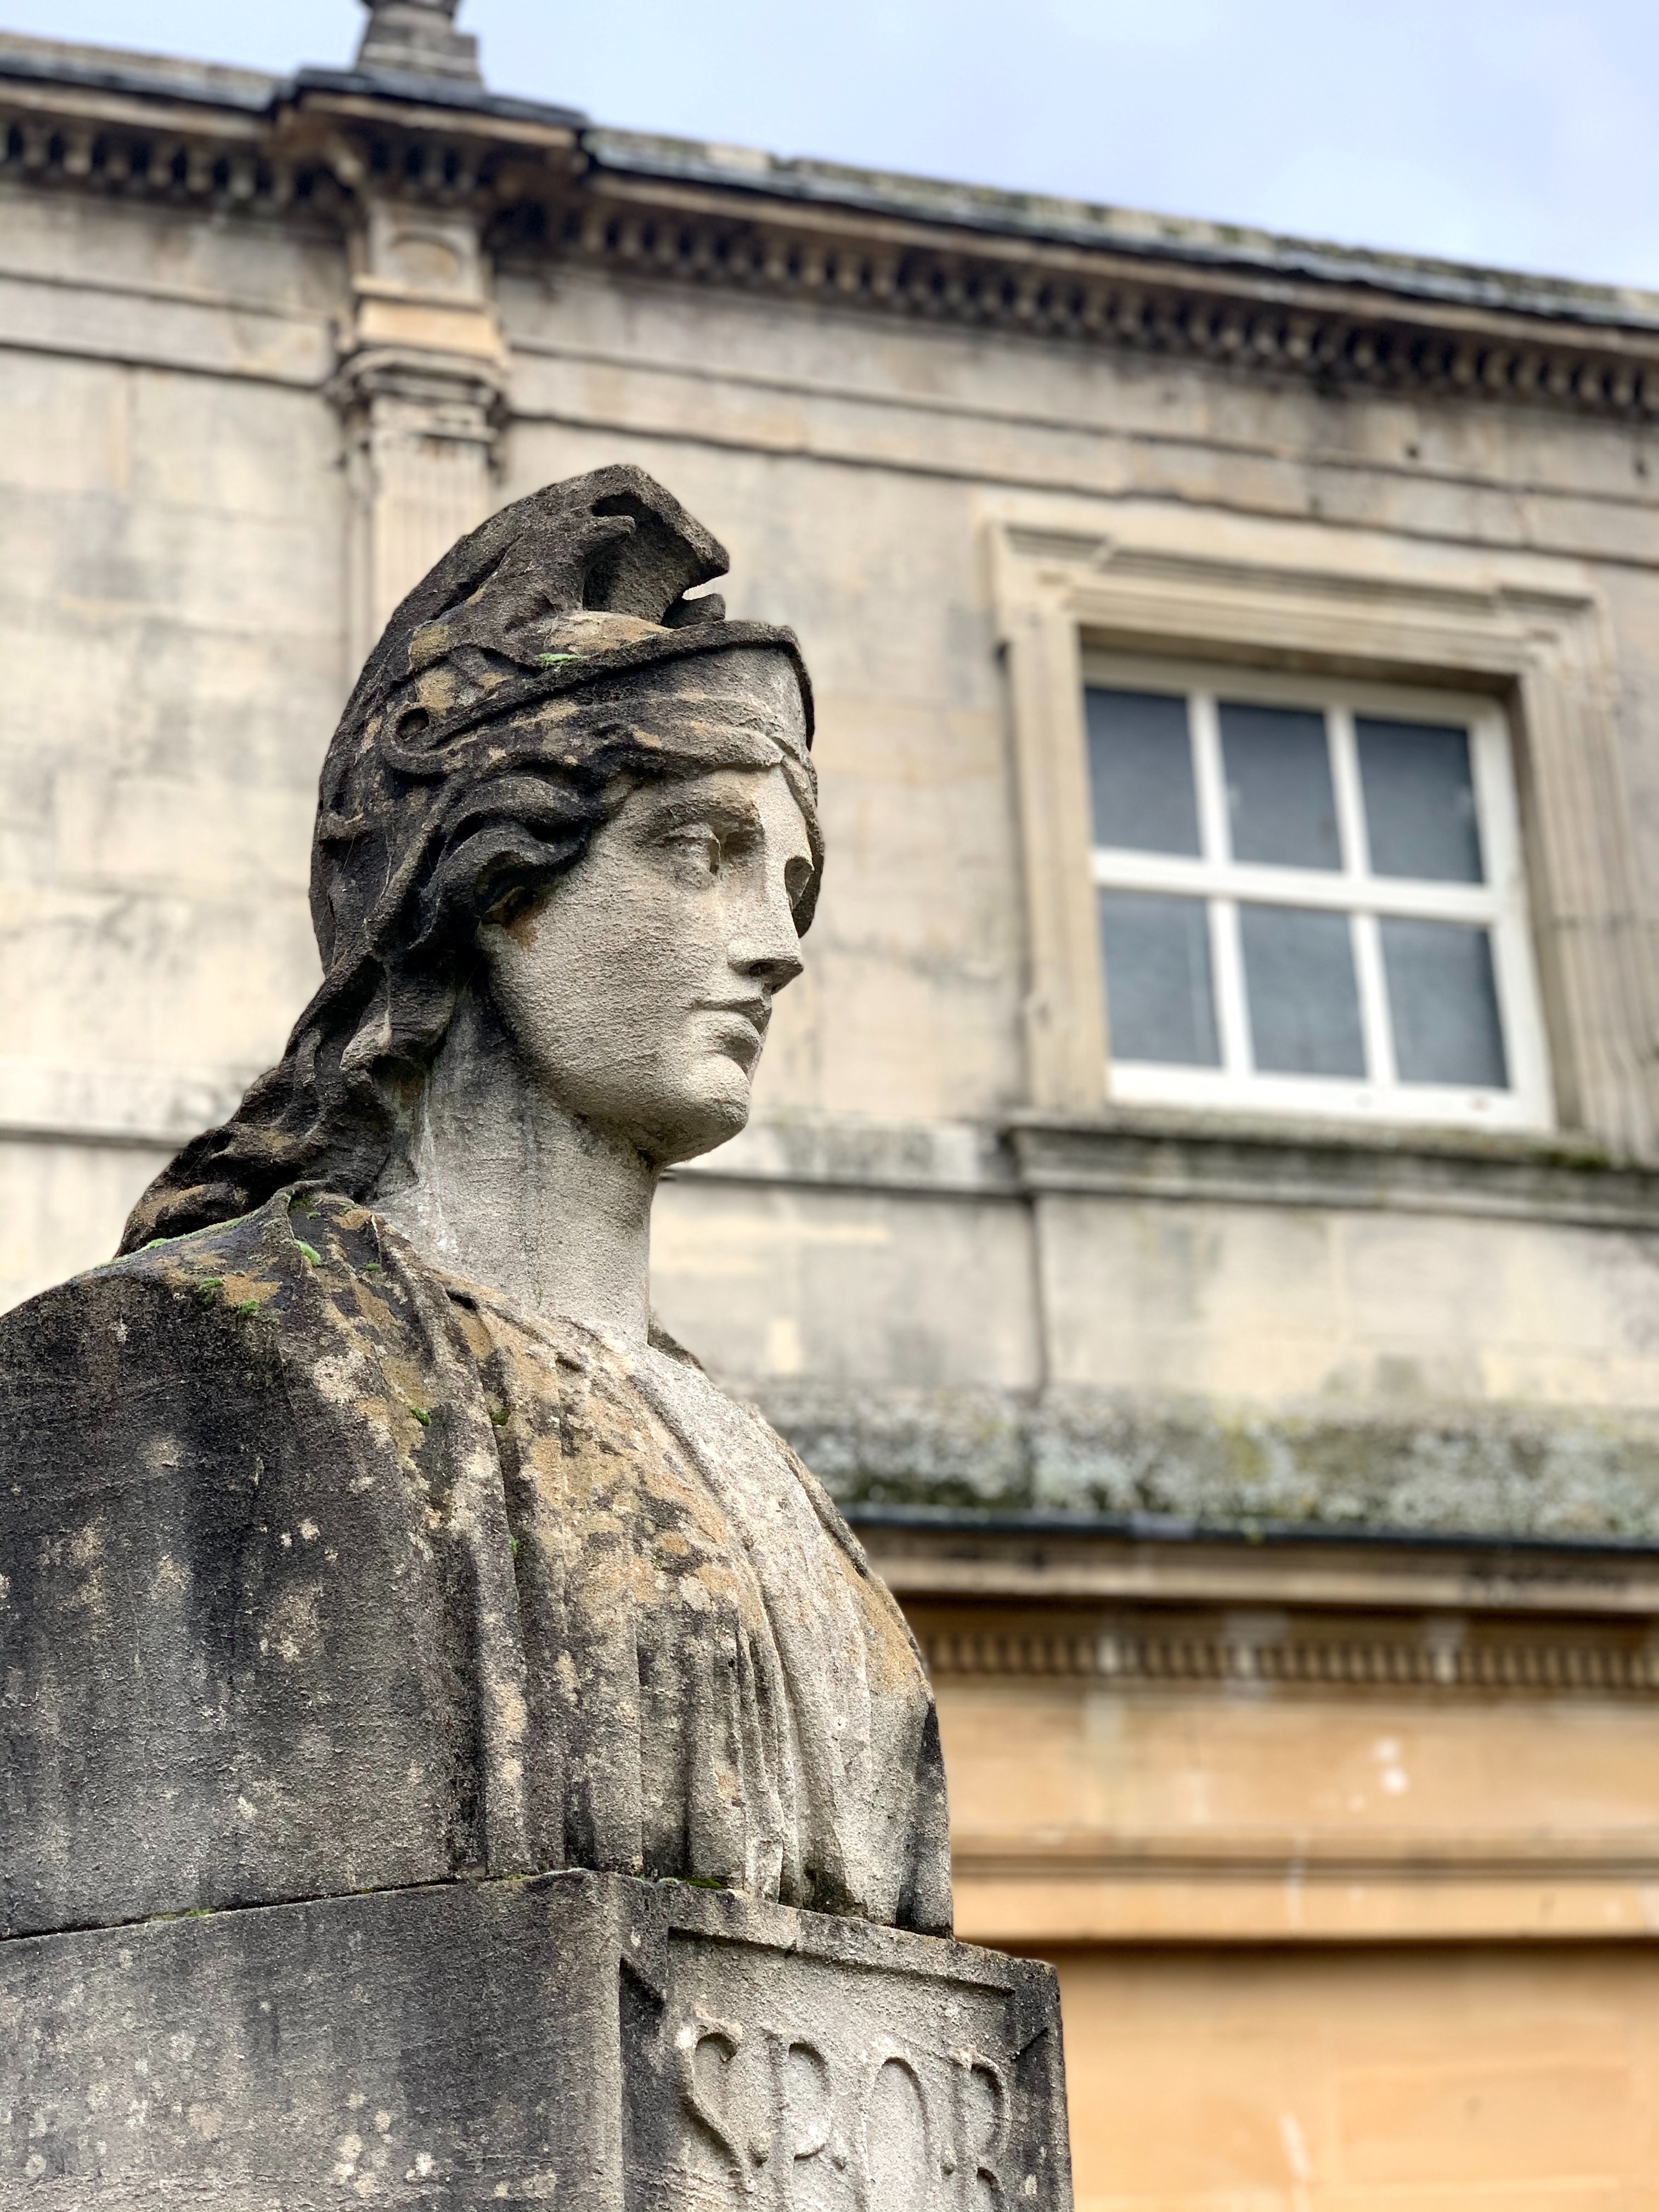 Statues of Roman Governors and Emperors, Roman Bath, Bath, UK